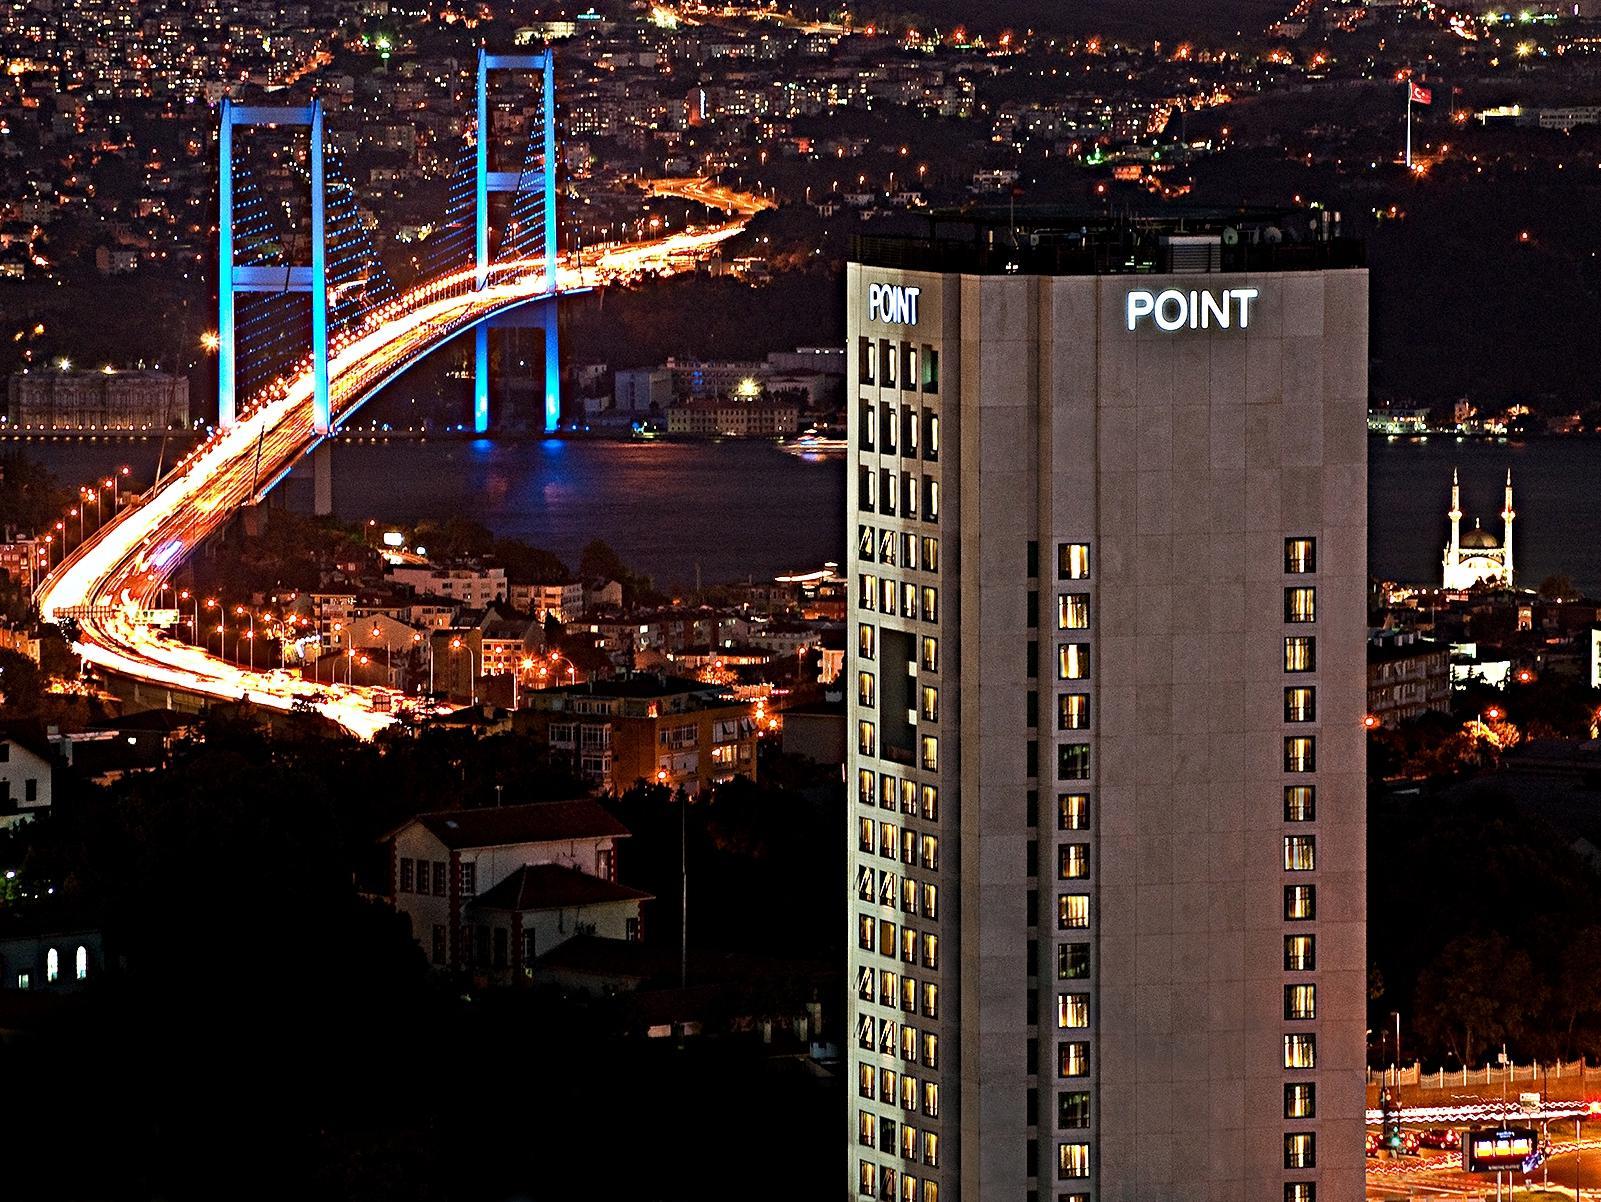 Point Hotel Barbaros Istanbul FAQ 2016, What facilities are there in Point Hotel Barbaros Istanbul 2016, What Languages Spoken are Supported in Point Hotel Barbaros Istanbul 2016, Which payment cards are accepted in Point Hotel Barbaros Istanbul , Istanbul Point Hotel Barbaros room facilities and services Q&A 2016, Istanbul Point Hotel Barbaros online booking services 2016, Istanbul Point Hotel Barbaros address 2016, Istanbul Point Hotel Barbaros telephone number 2016,Istanbul Point Hotel Barbaros map 2016, Istanbul Point Hotel Barbaros traffic guide 2016, how to go Istanbul Point Hotel Barbaros, Istanbul Point Hotel Barbaros booking online 2016, Istanbul Point Hotel Barbaros room types 2016.